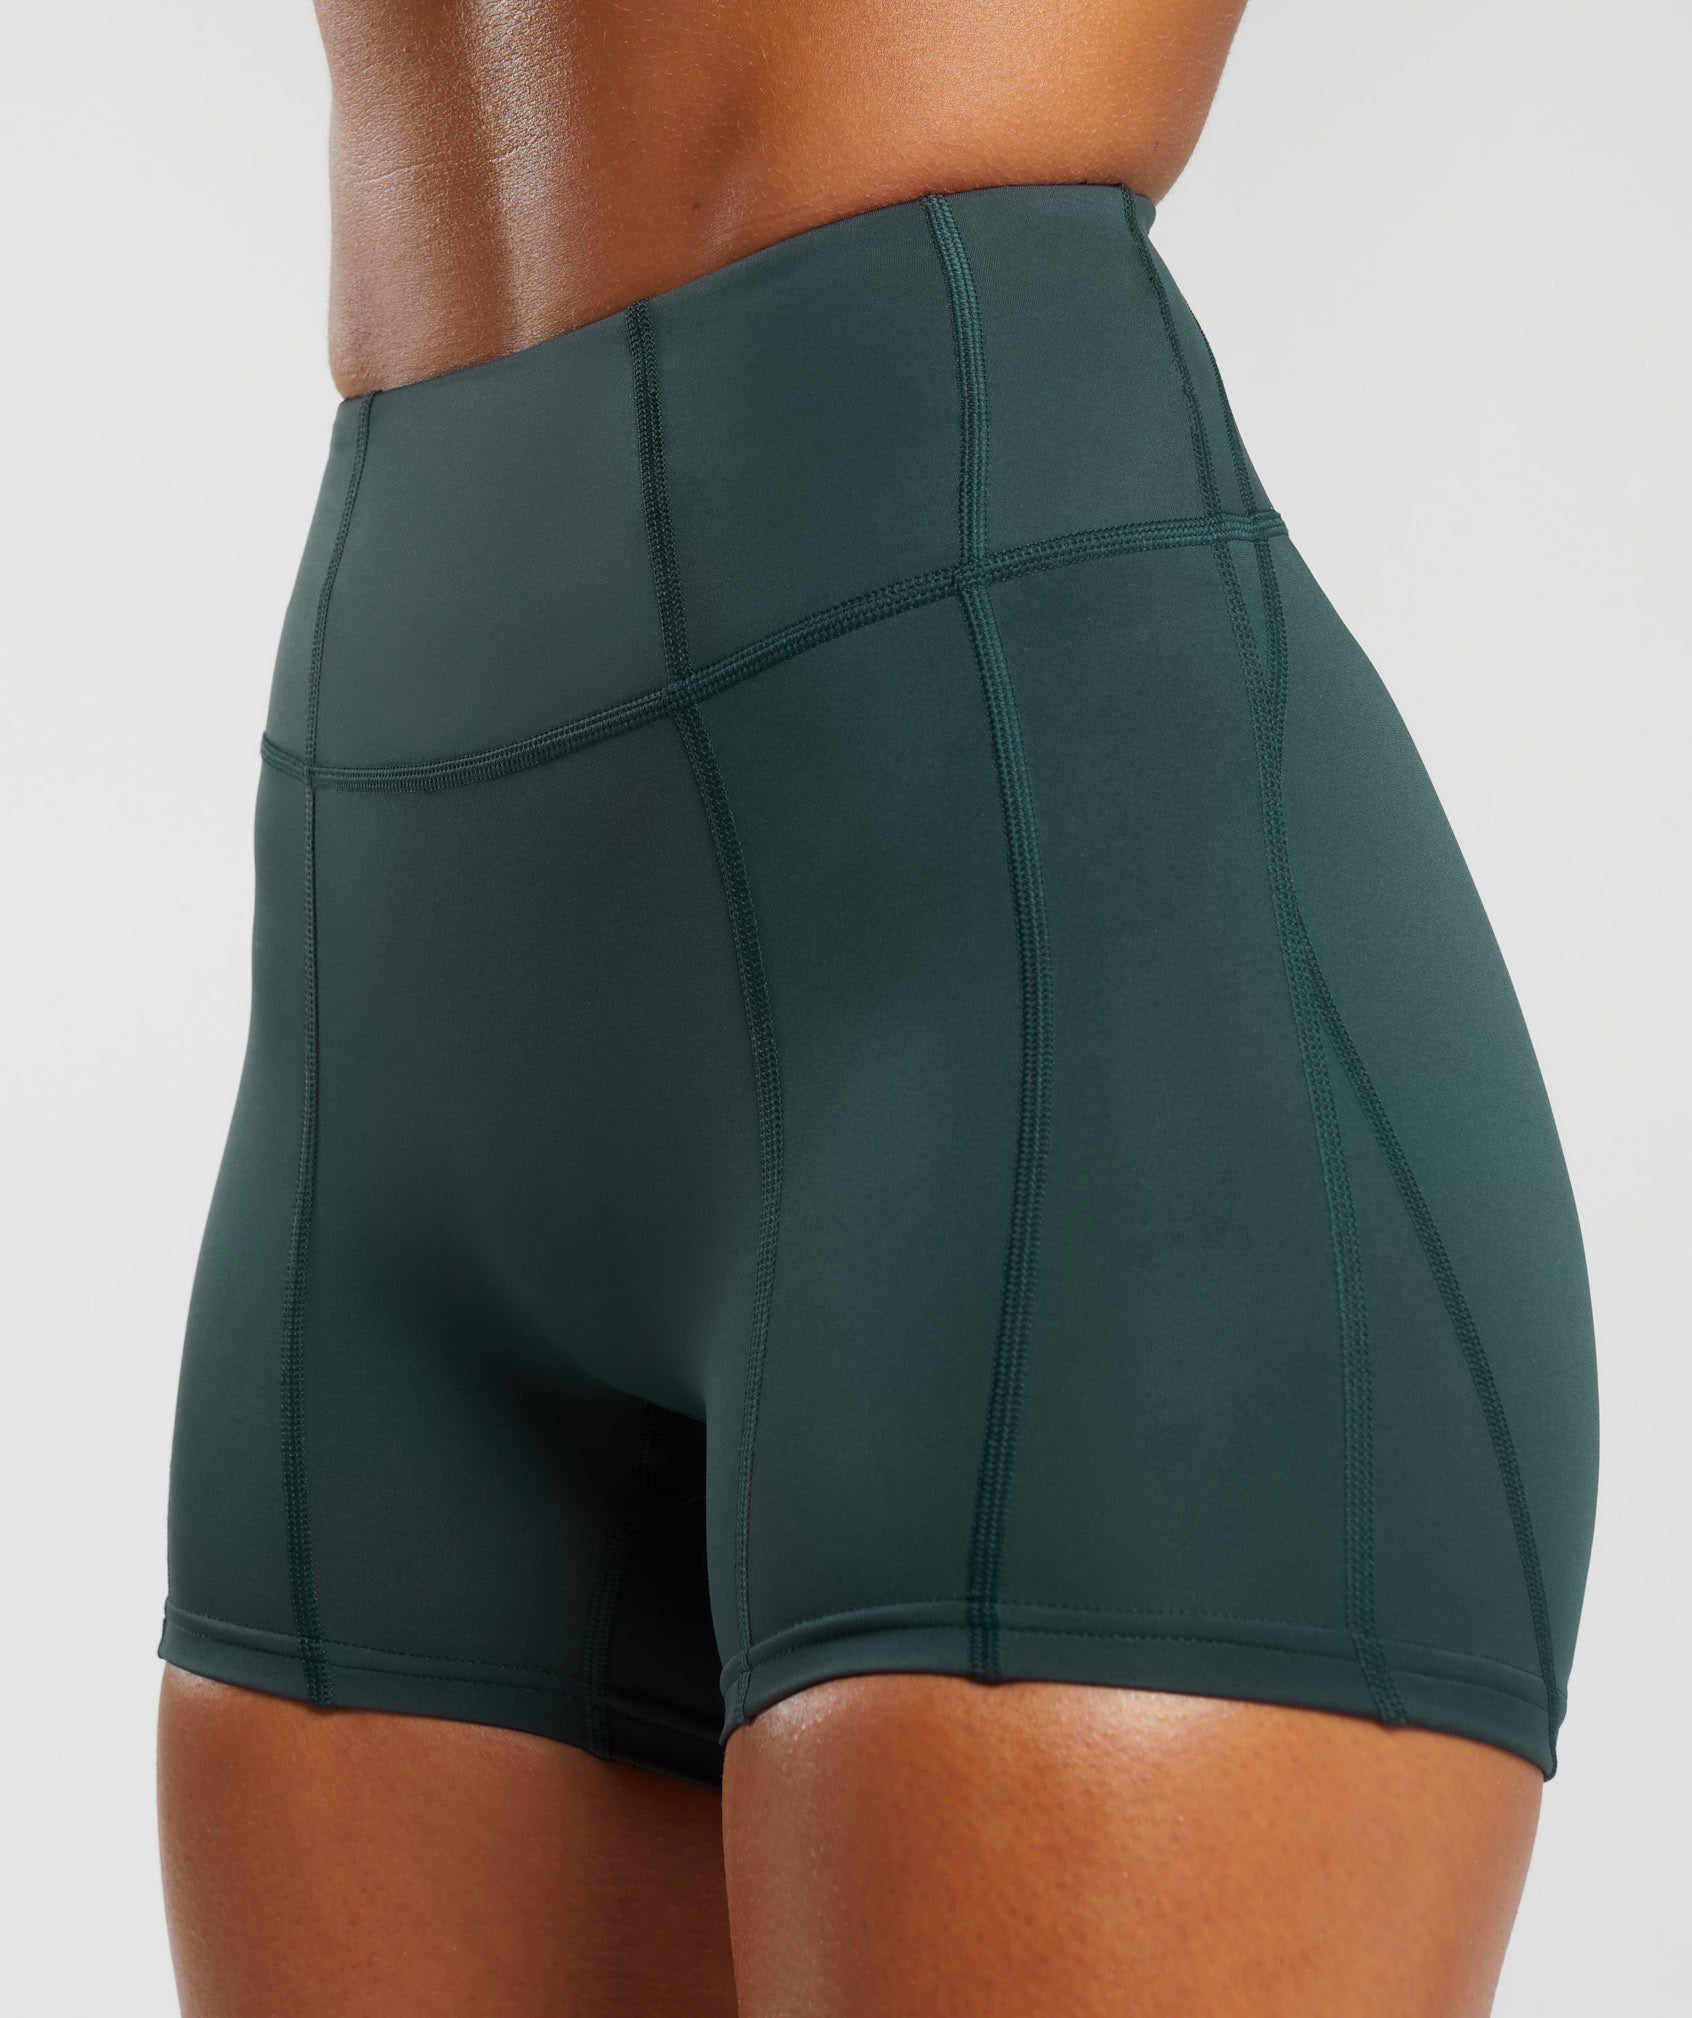 GS Power High Rise Shorts in Darkest Teal - view 6